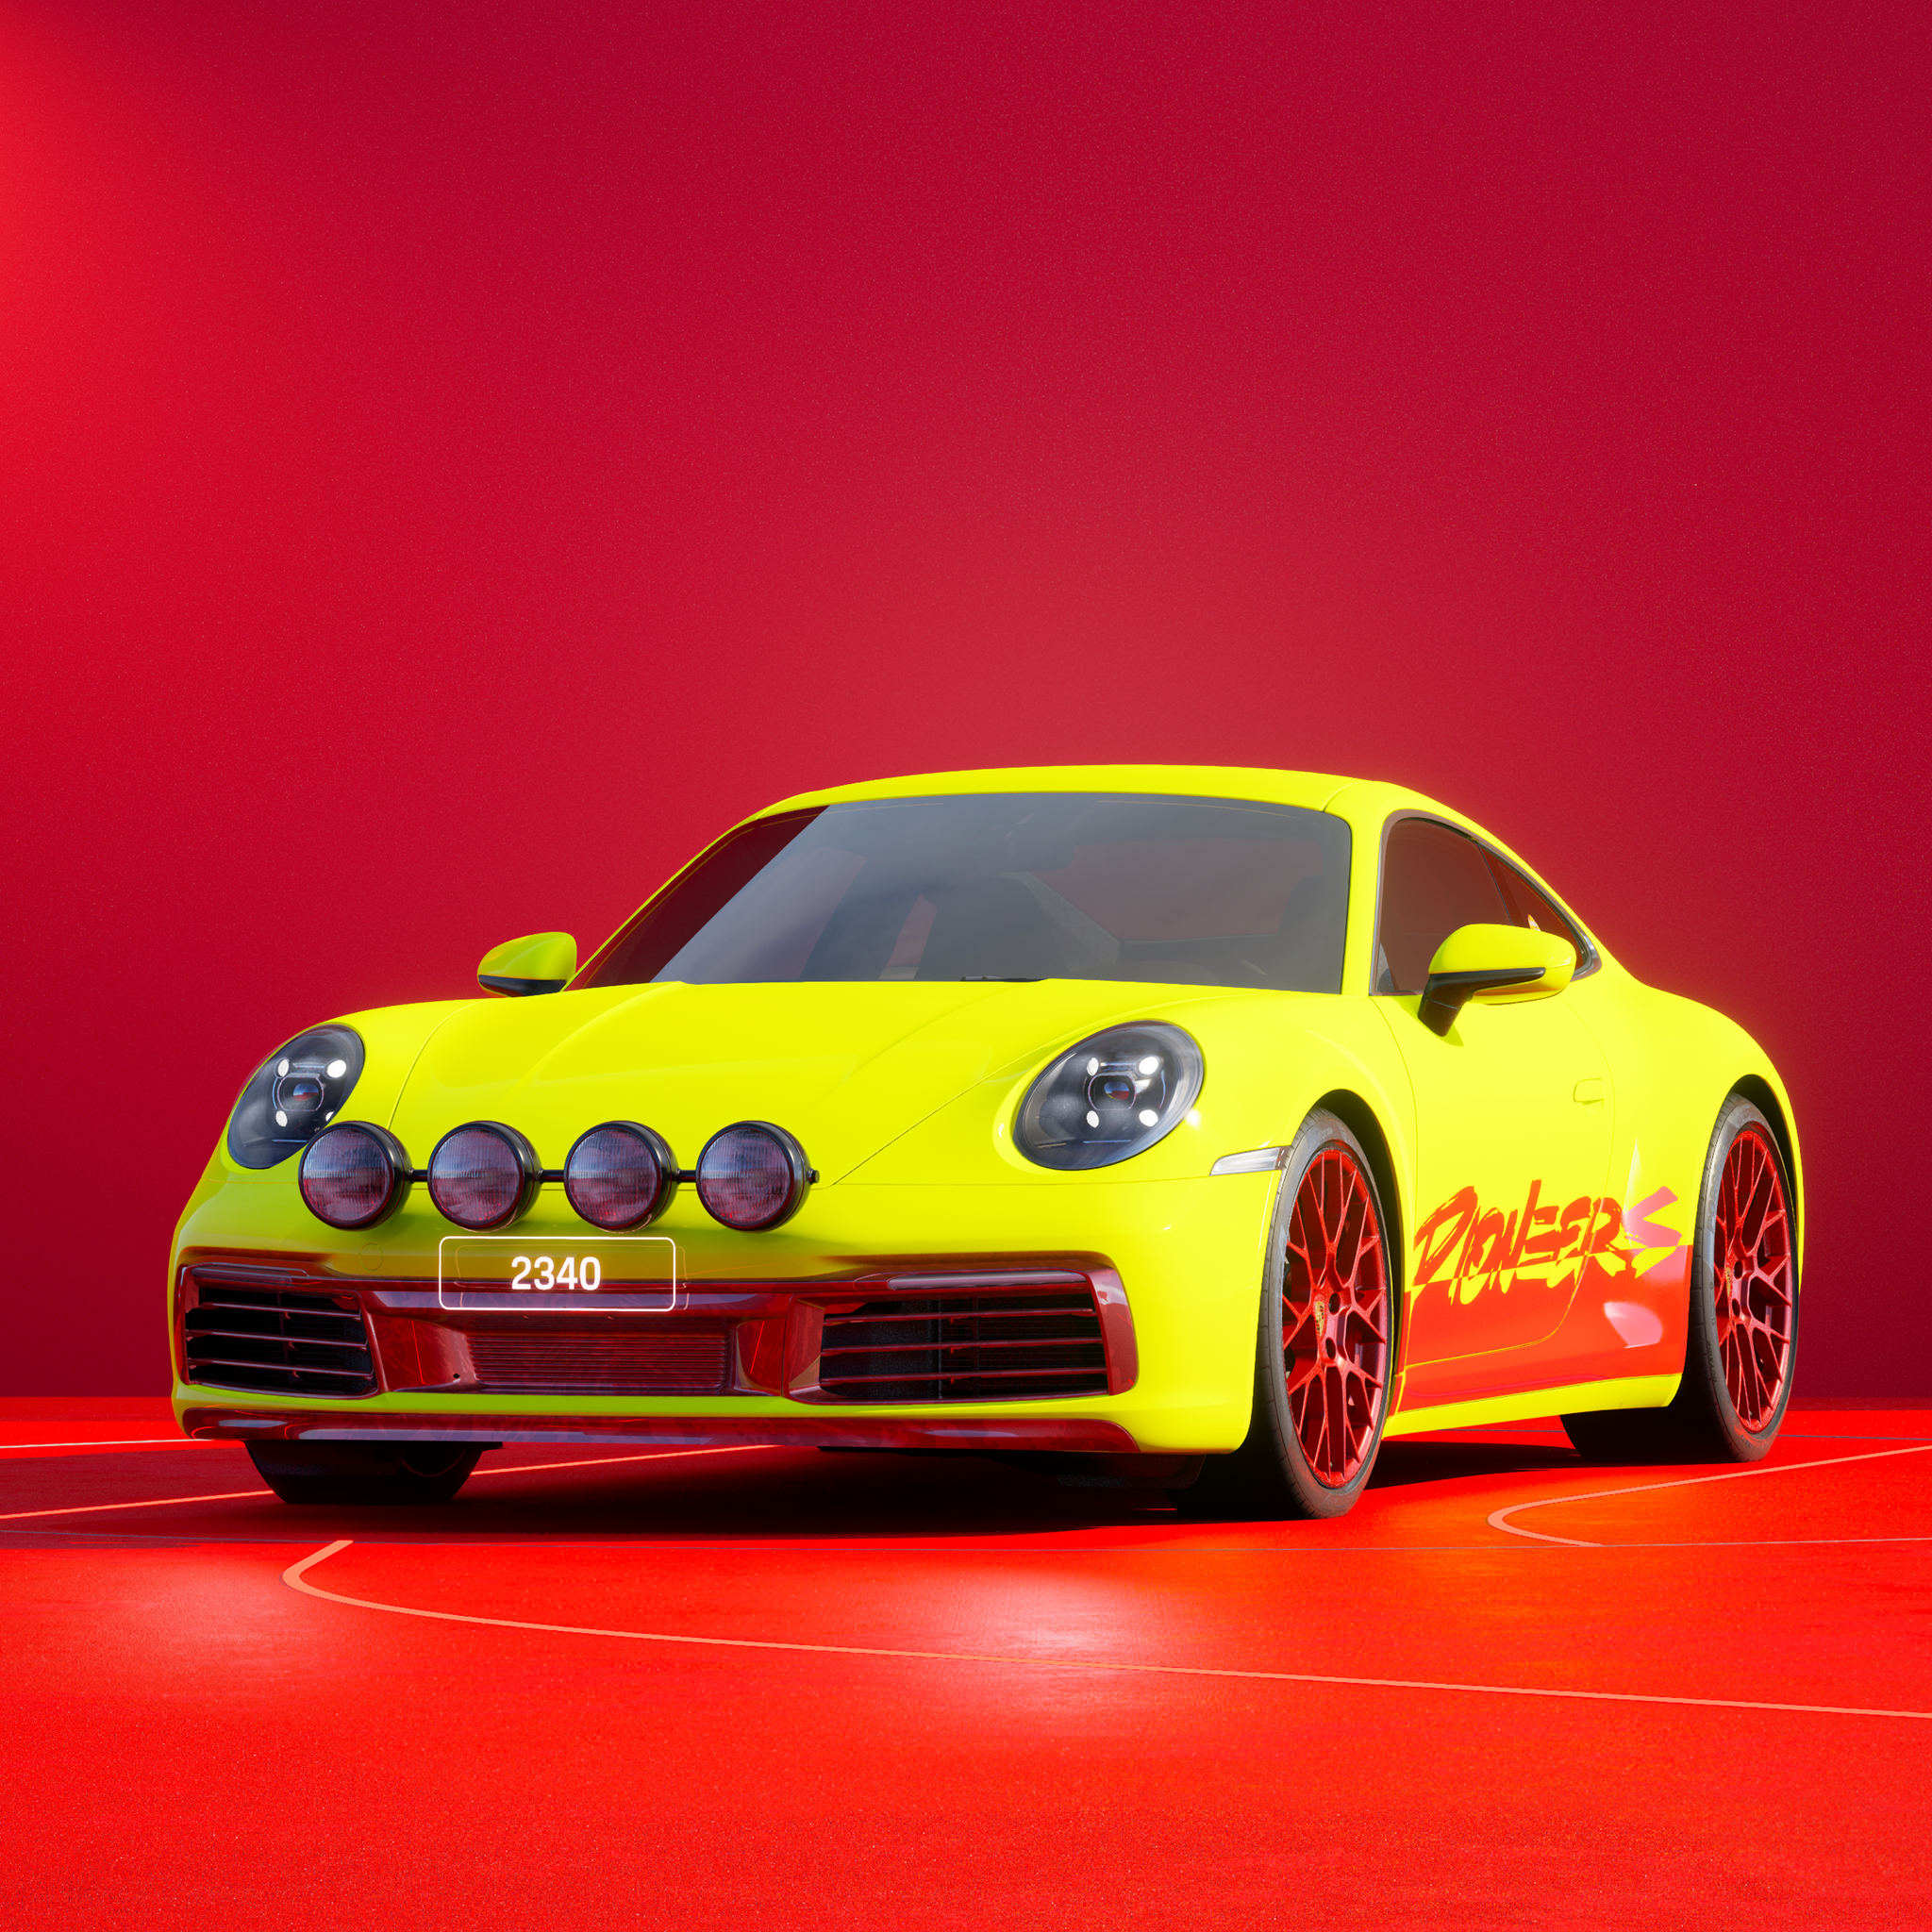 The PORSCHΞ 911 2340 image in phase